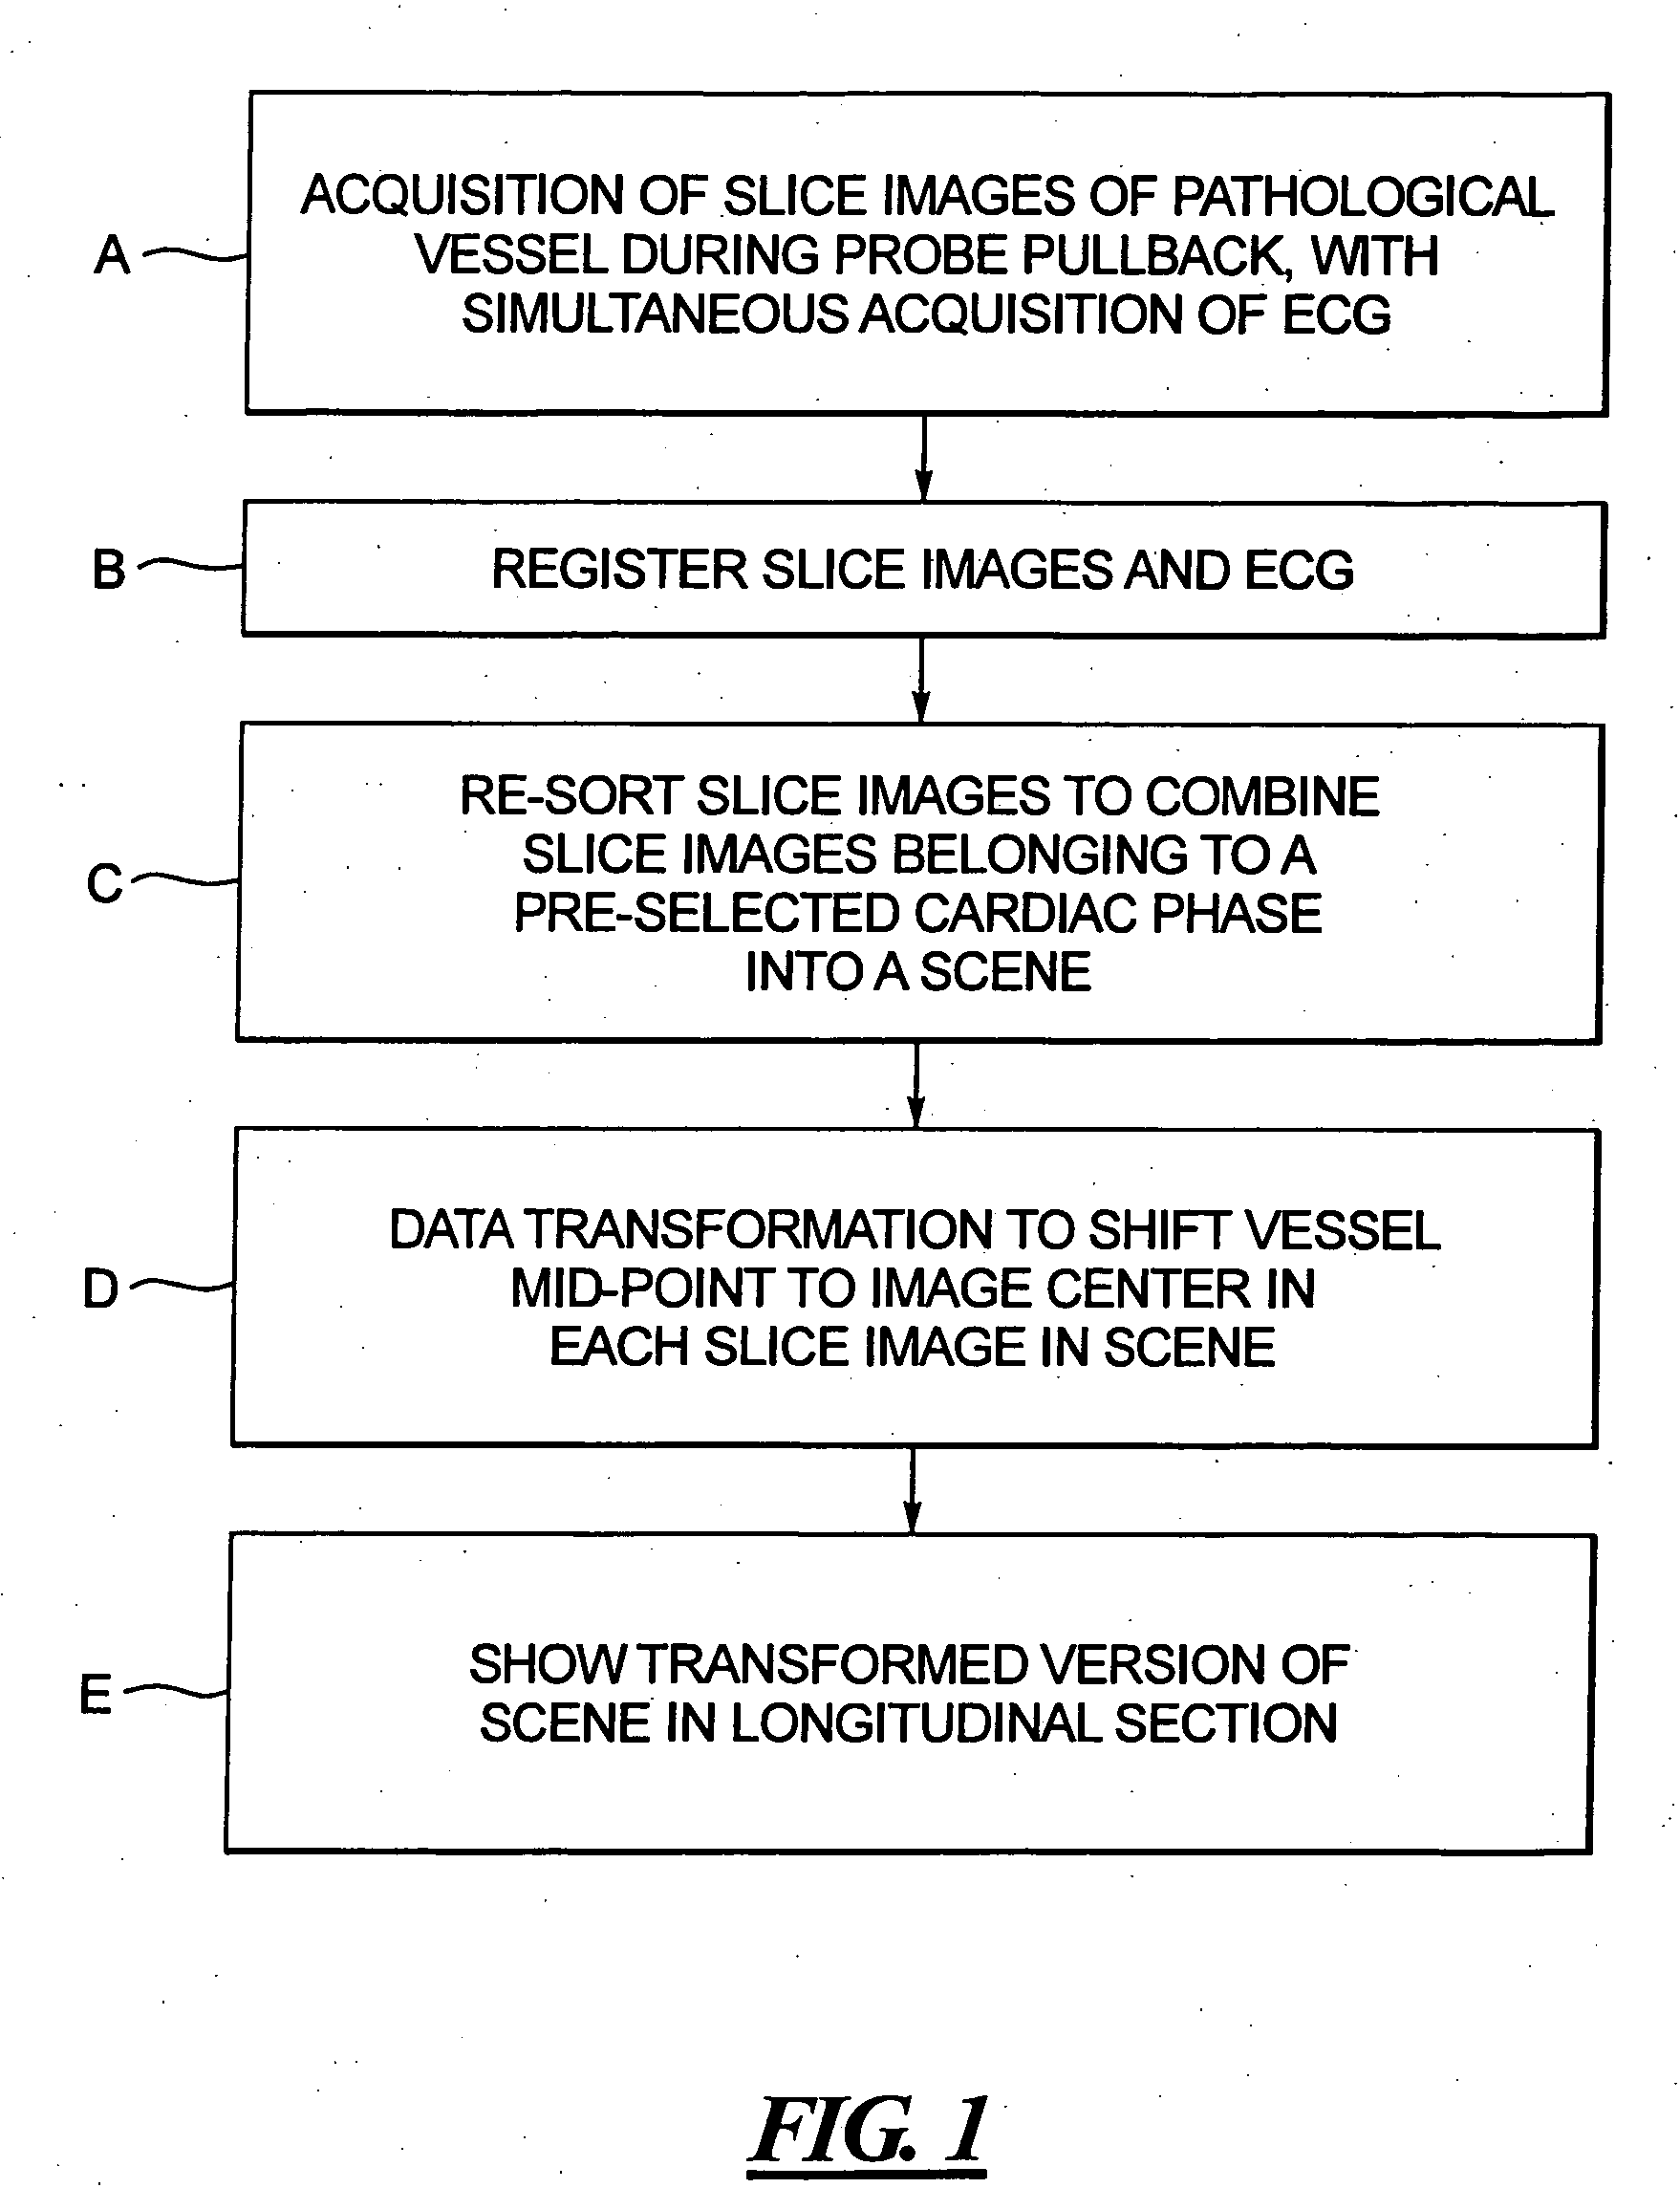 Method and apparatus for ECG-synchronized optically-based image acquisition and transformation